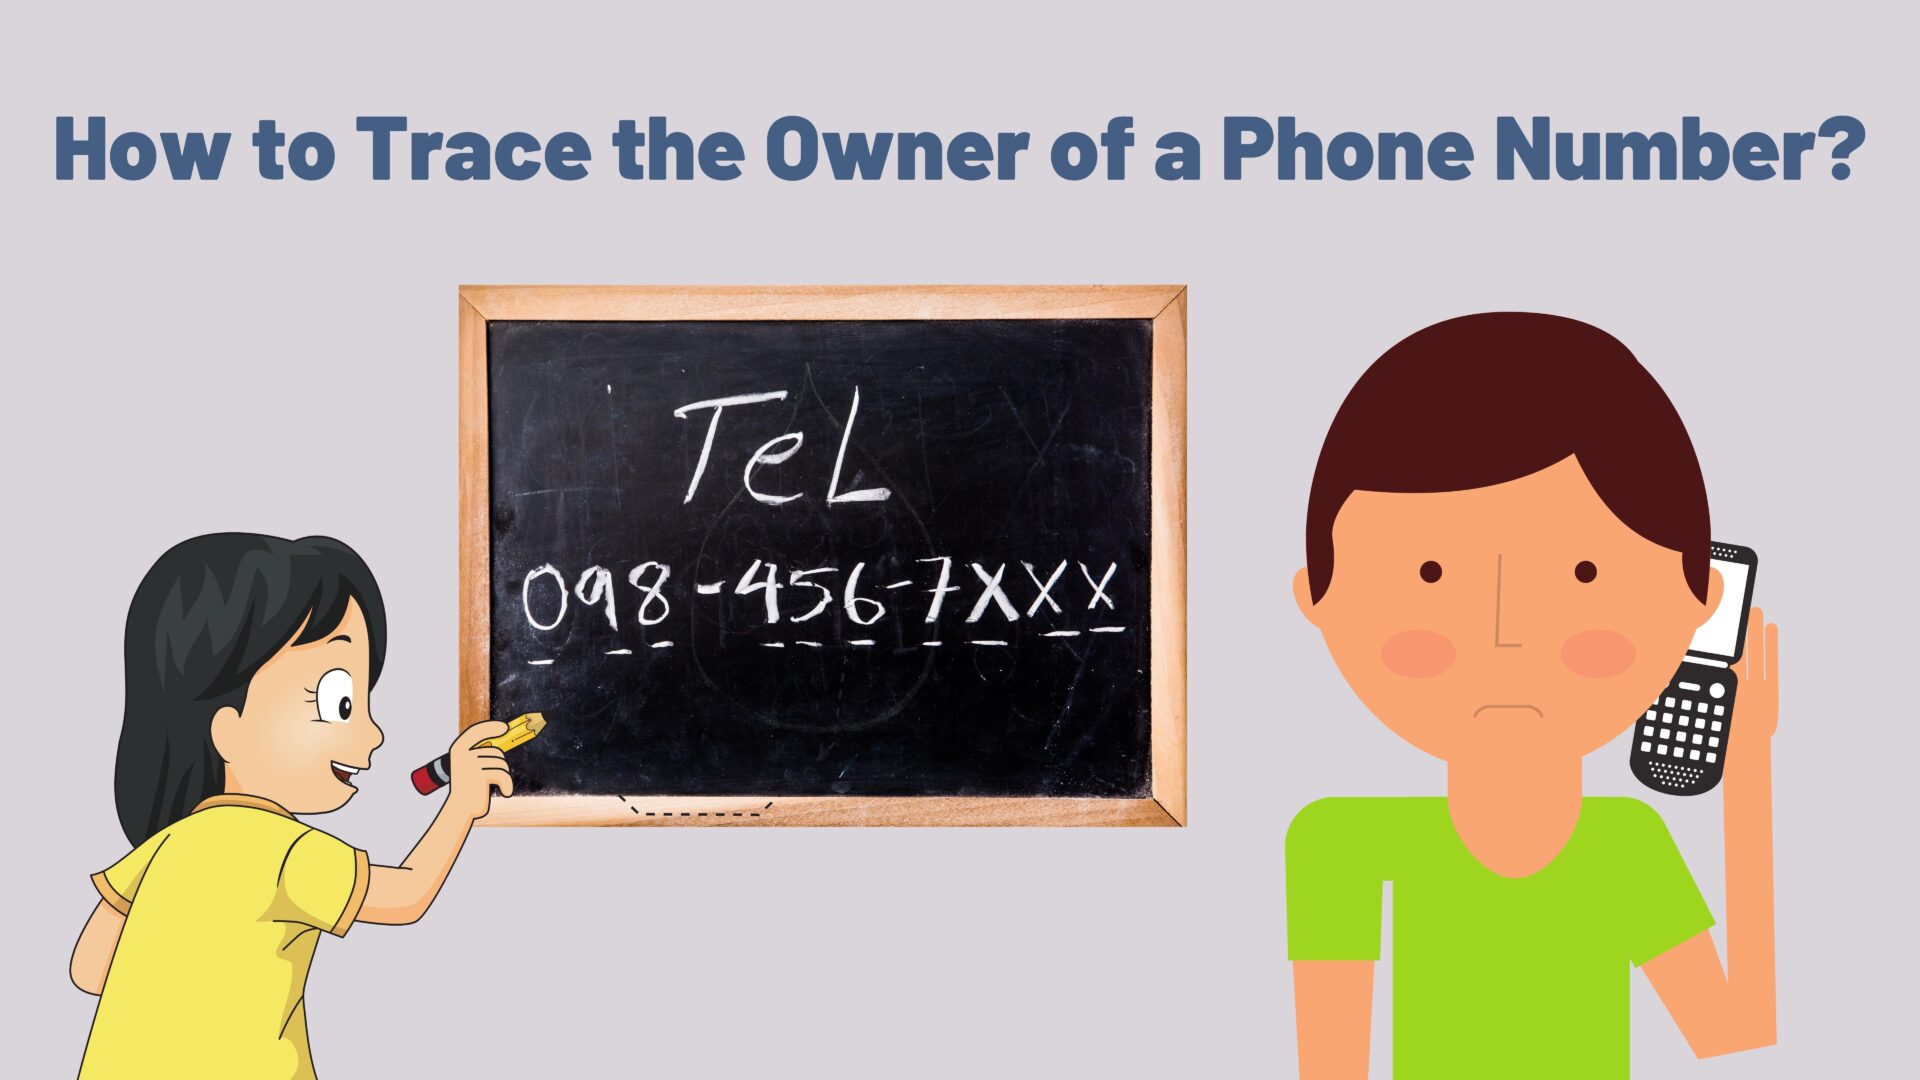 How to Trace the Owner of a Phone Number?